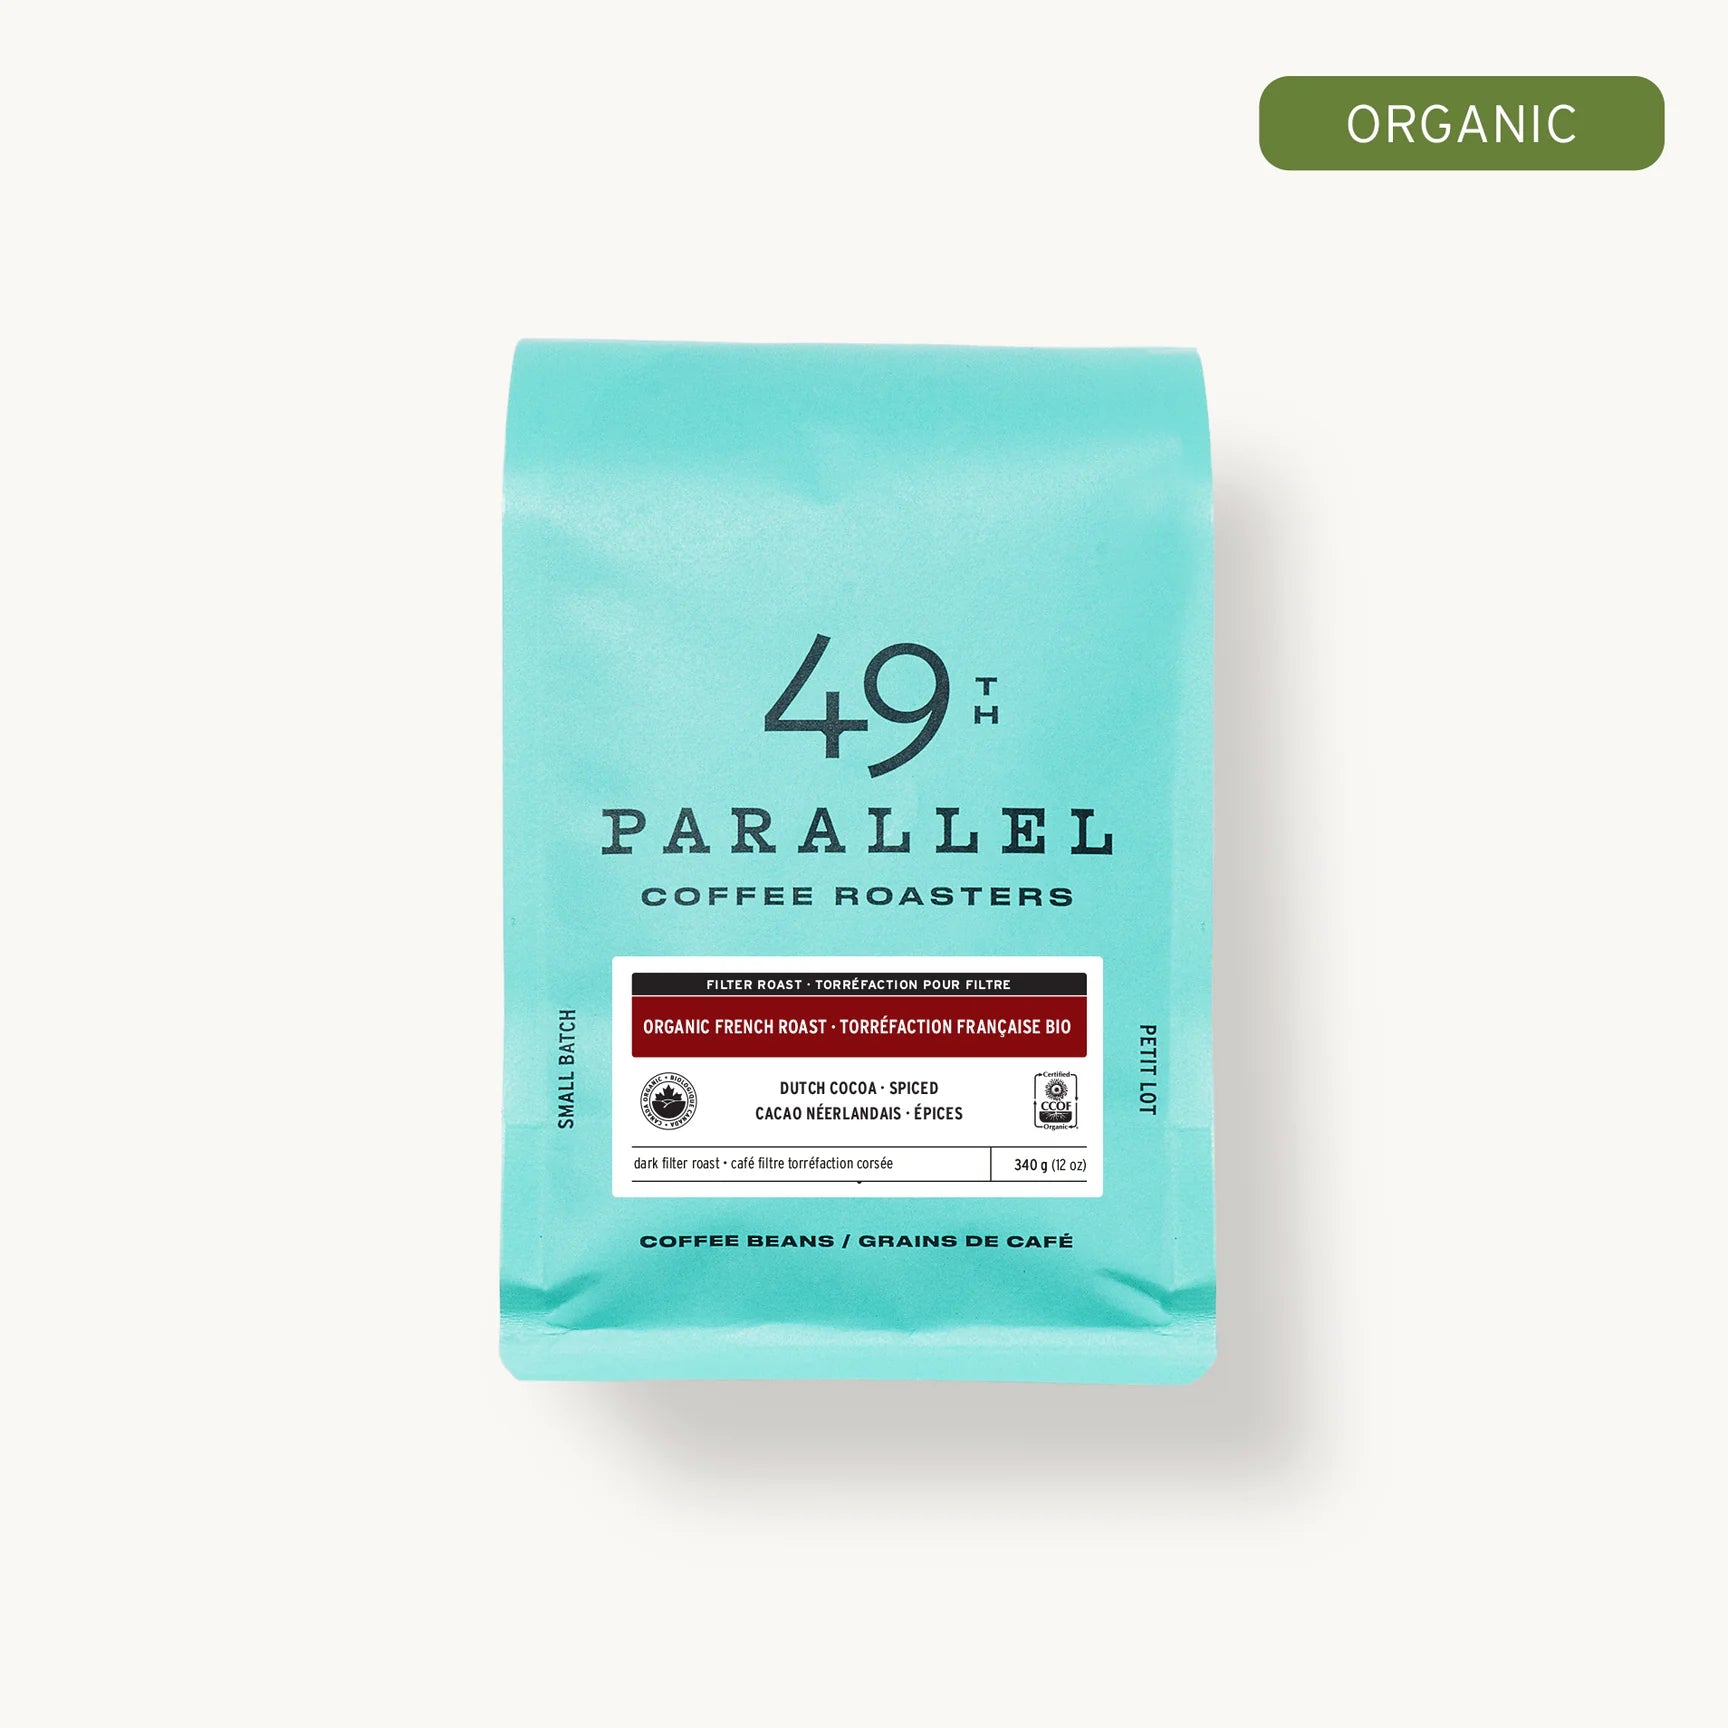 49th Parallel Coffee Roasters Organic French Roast - Dark Roast - Dutch Cocoa, Spiced Flavor - Direct Trade - Ideal for Espresso & Filter Coffee - Ethically Sourced - Product Details: Producer Varies, Country Varies, Region Varies, Elevation Varies, Variety Varies, Harvest Year 2018, Roast Level Dark Filter Roast